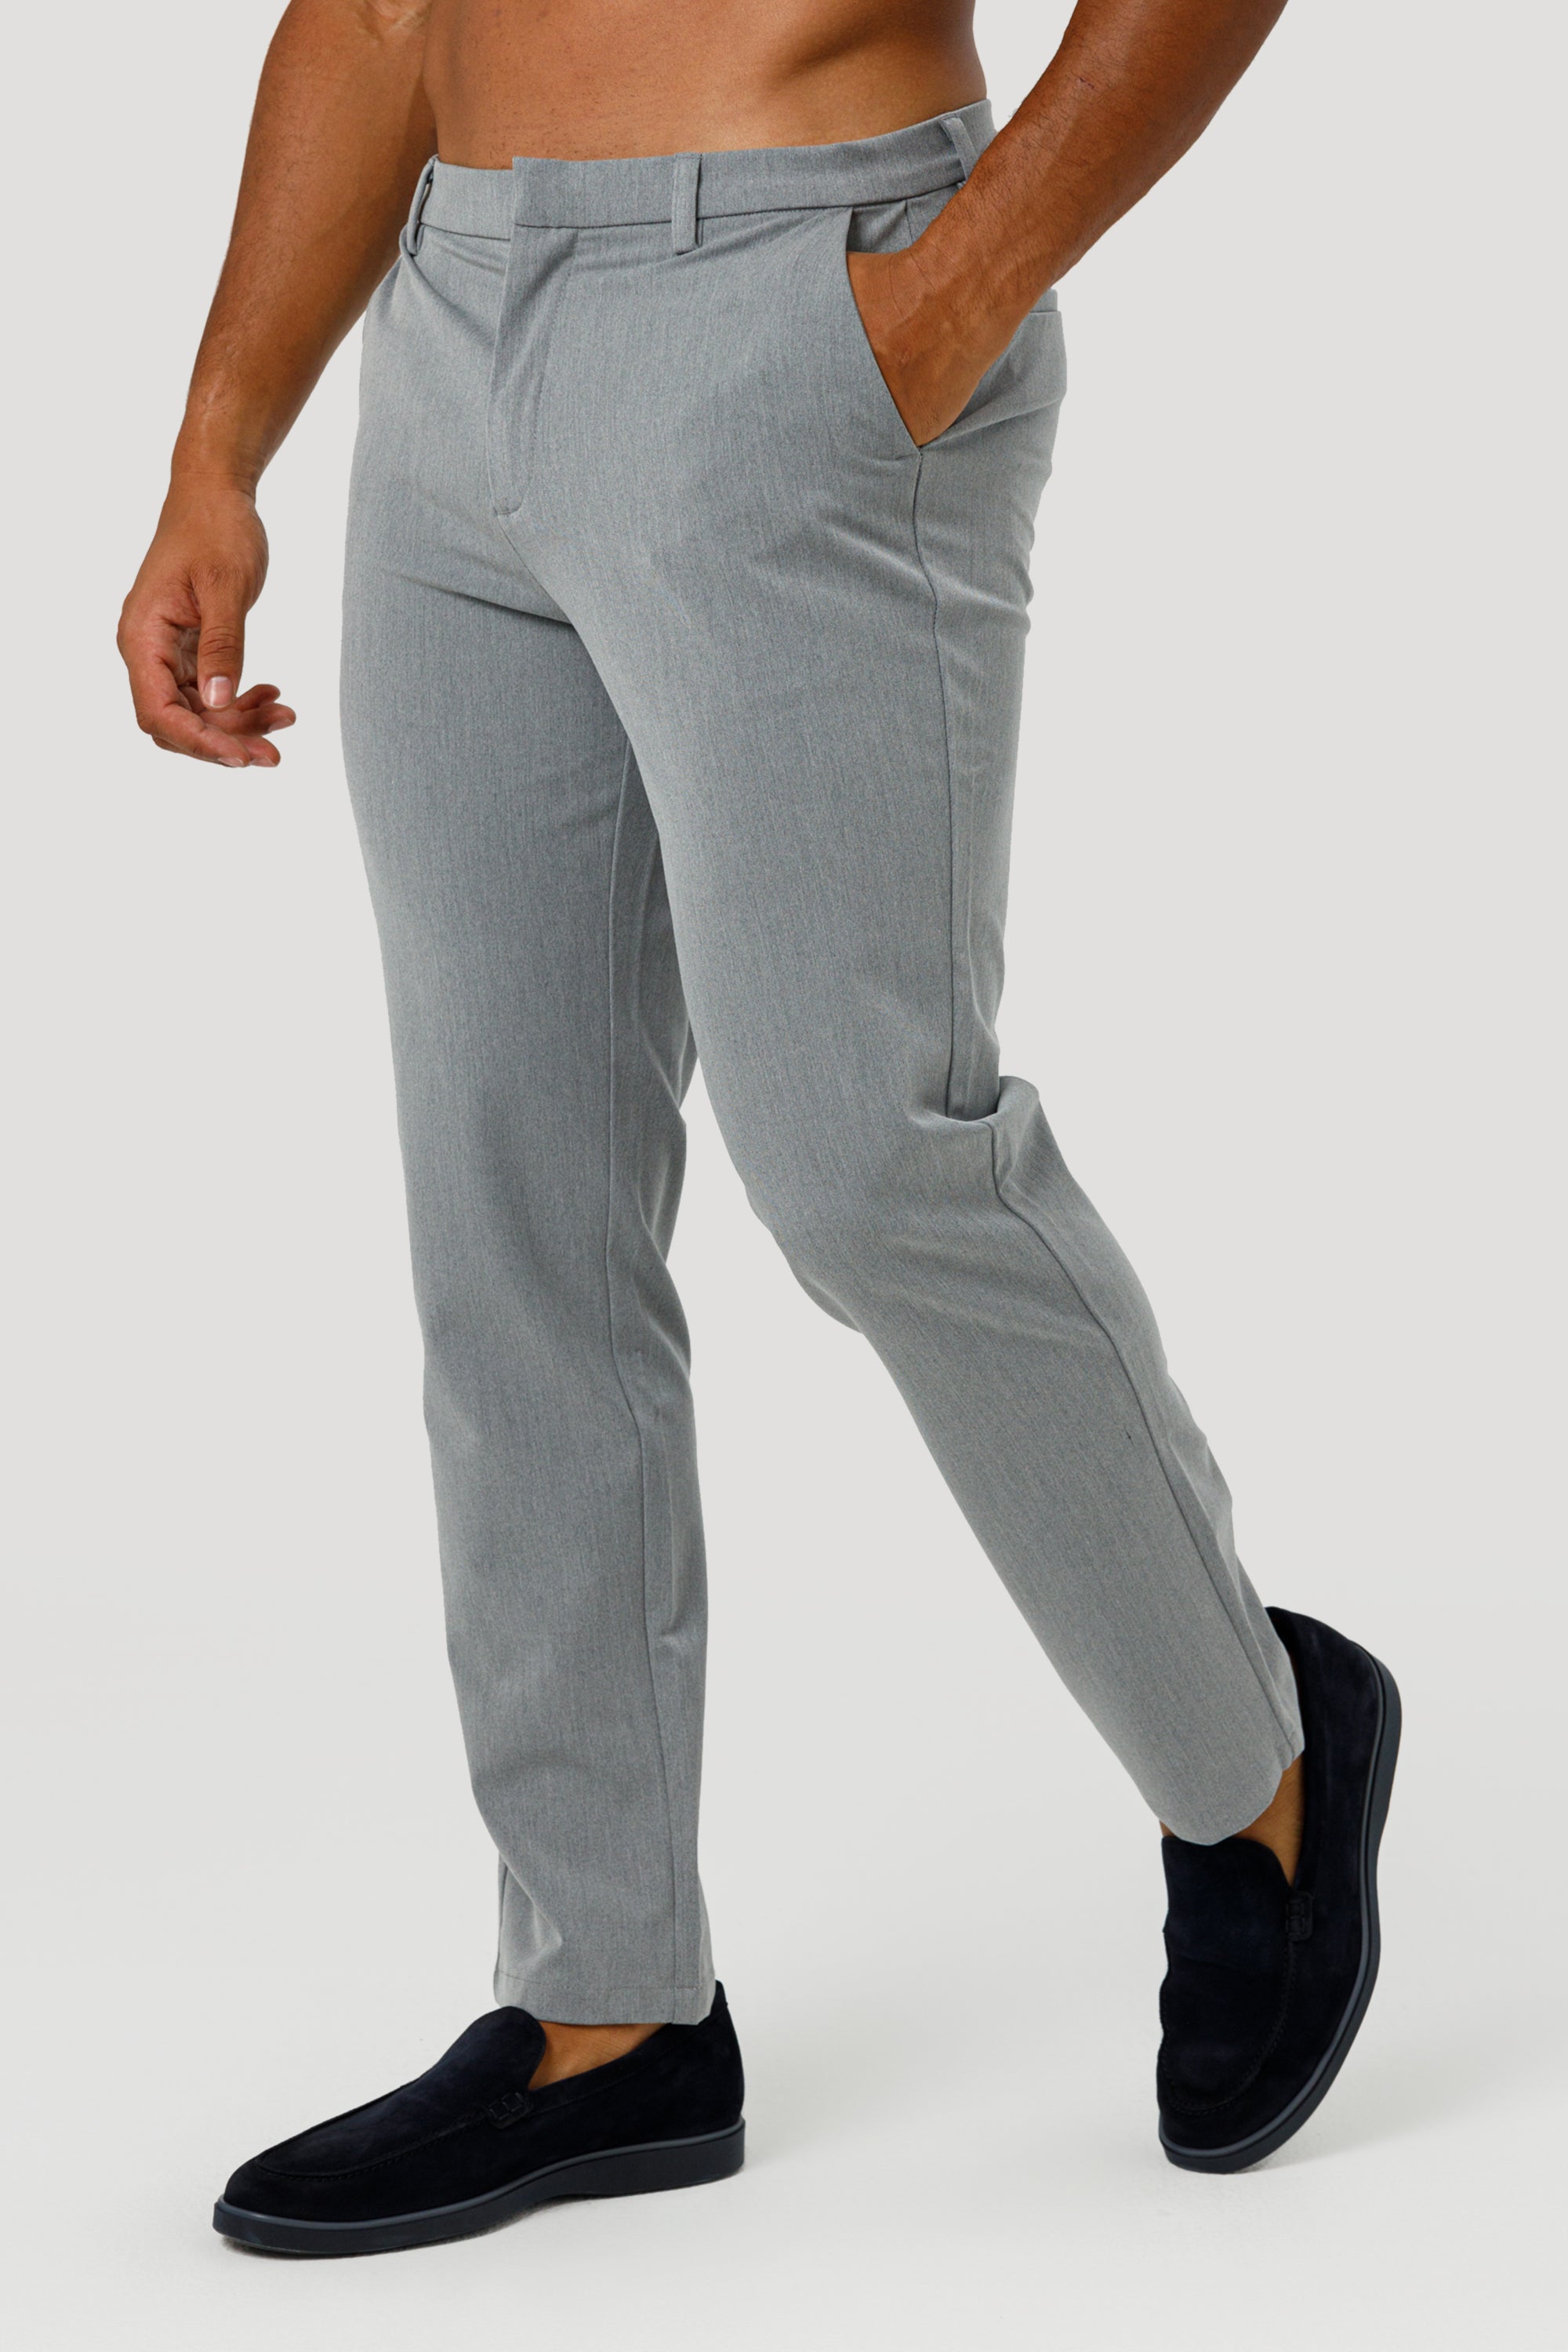 THE LUCIA TROUSERS - GRIS CLARO